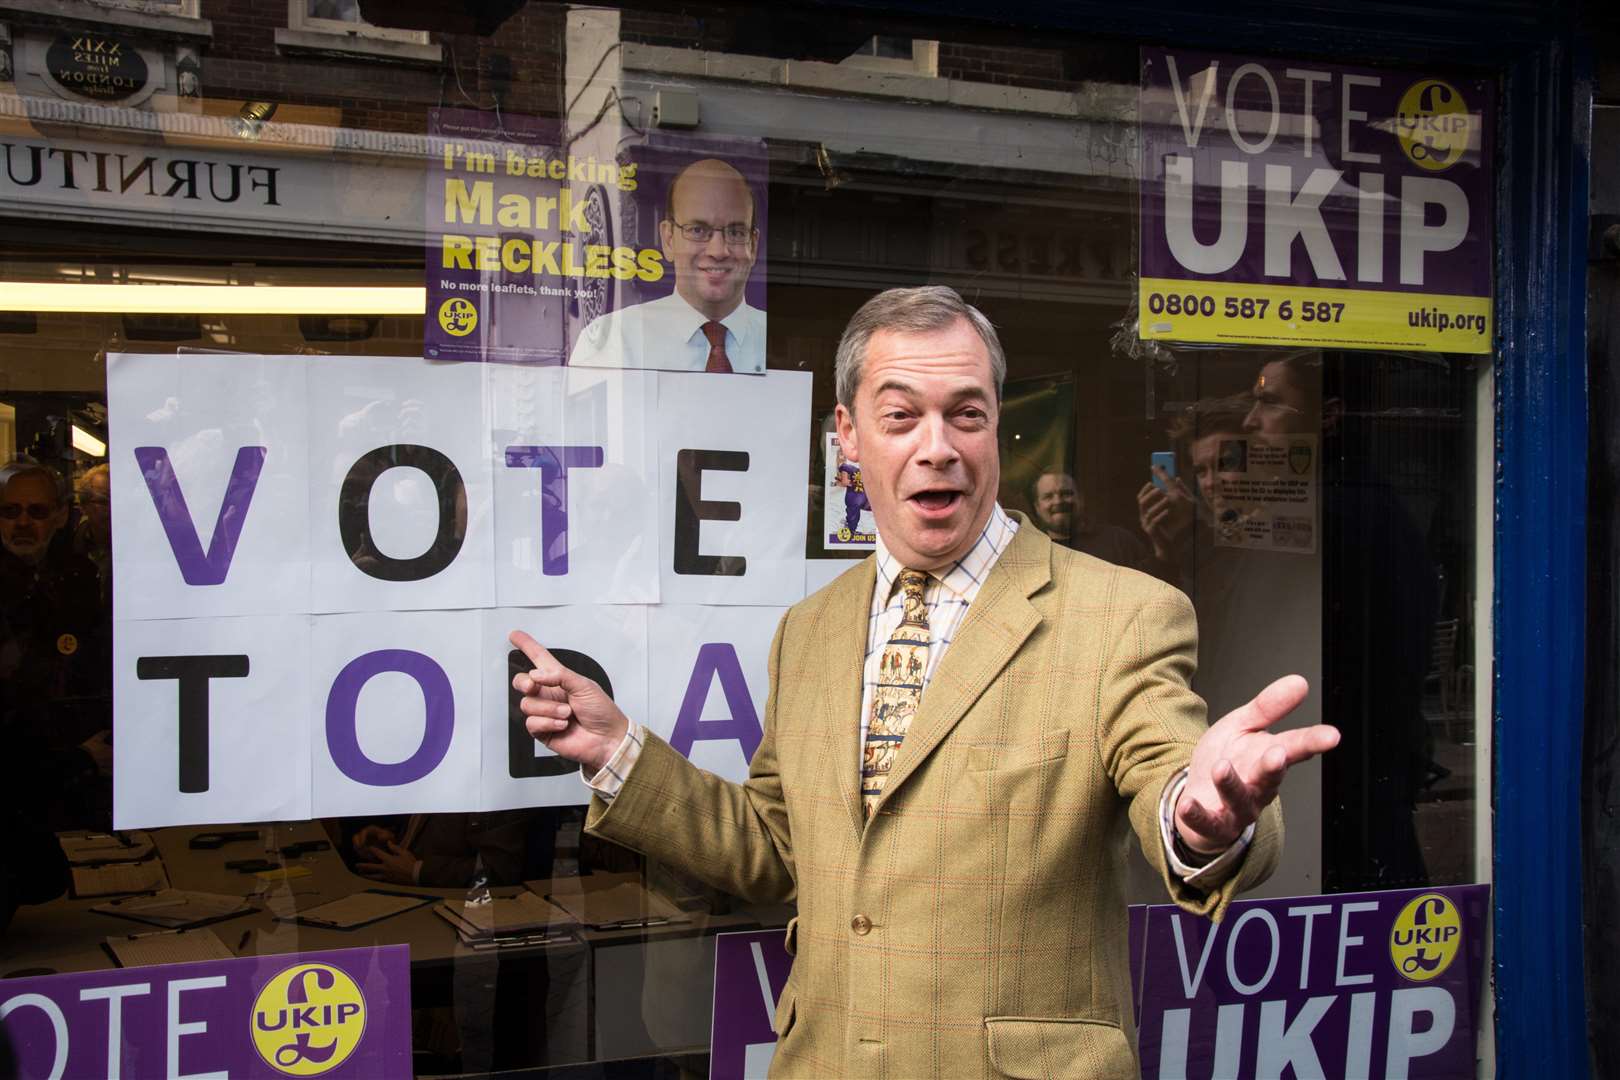 Nigel Farage is a former leader of UKIP, and is pictured here at the Rochester offices on the day of a by-election for Rochester and Strood in 2014